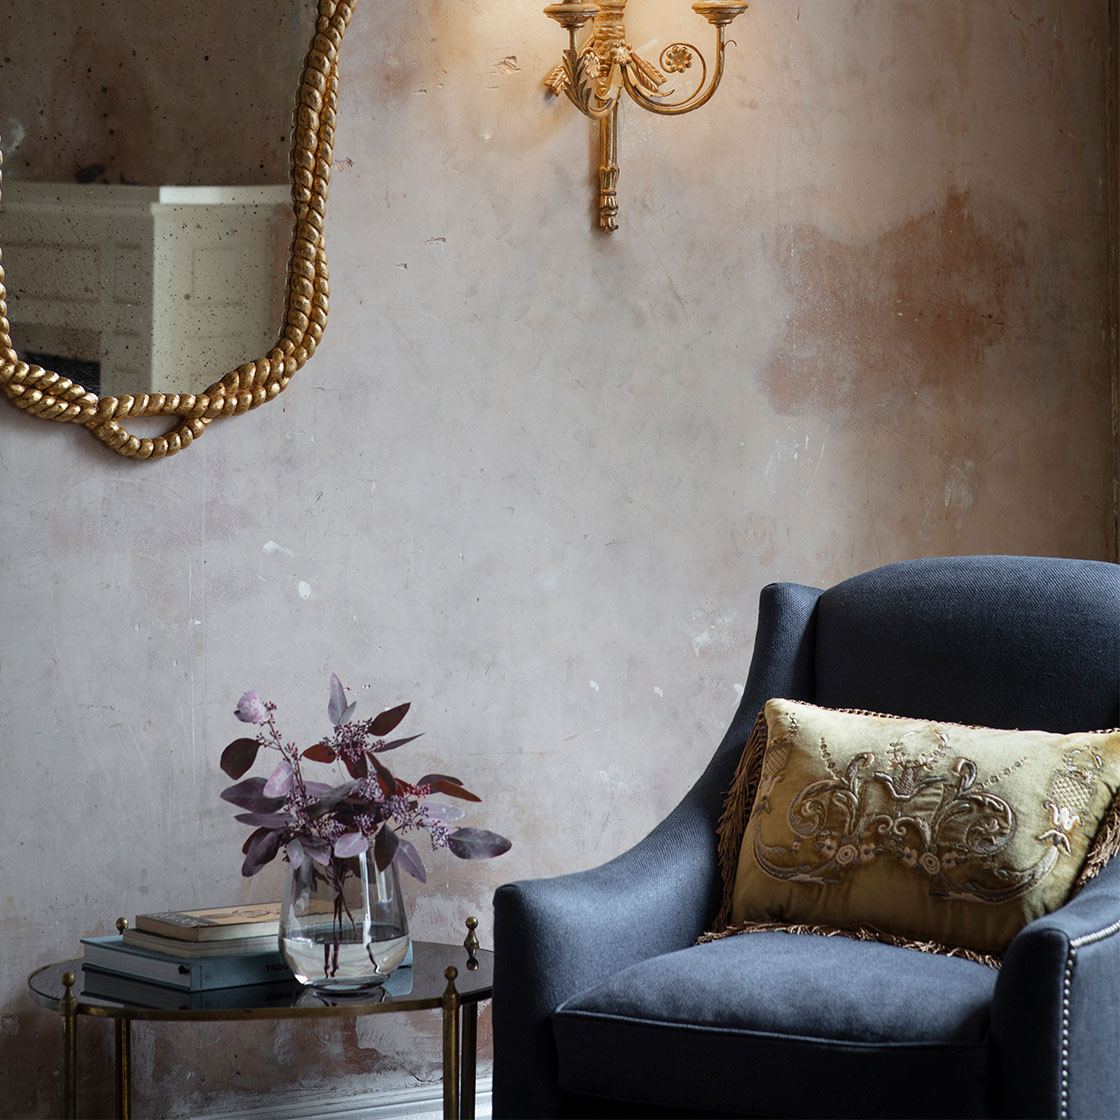 Alexandra chair in Donegal - Gunmetal with Regency light and Nelson mirror - Beaumont & Fletcher